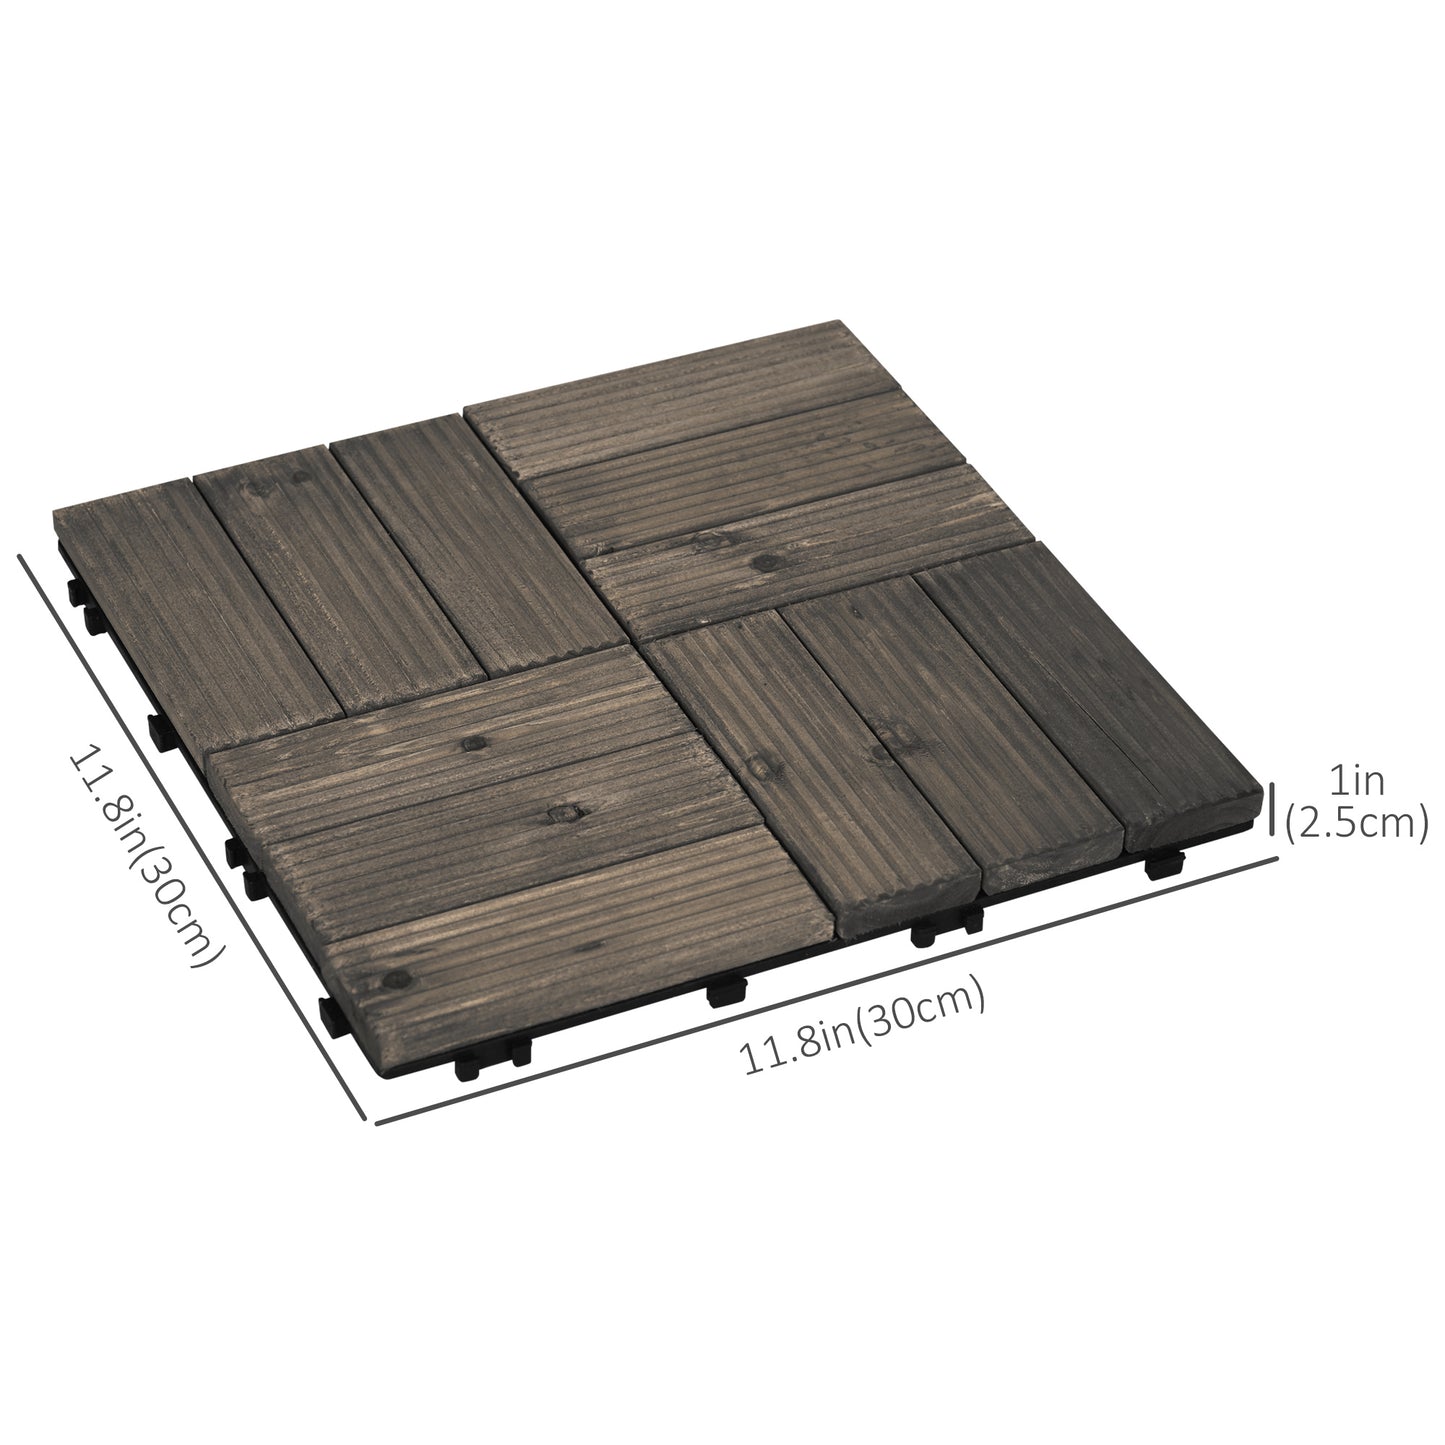 54 Pcs Wood Interlocking Deck Tiles, 12 x 12in Outdoor Flooring Tiles for Indoor and Outdoor Use, Tools Free Assembly, Charcoal Grey - Gallery Canada